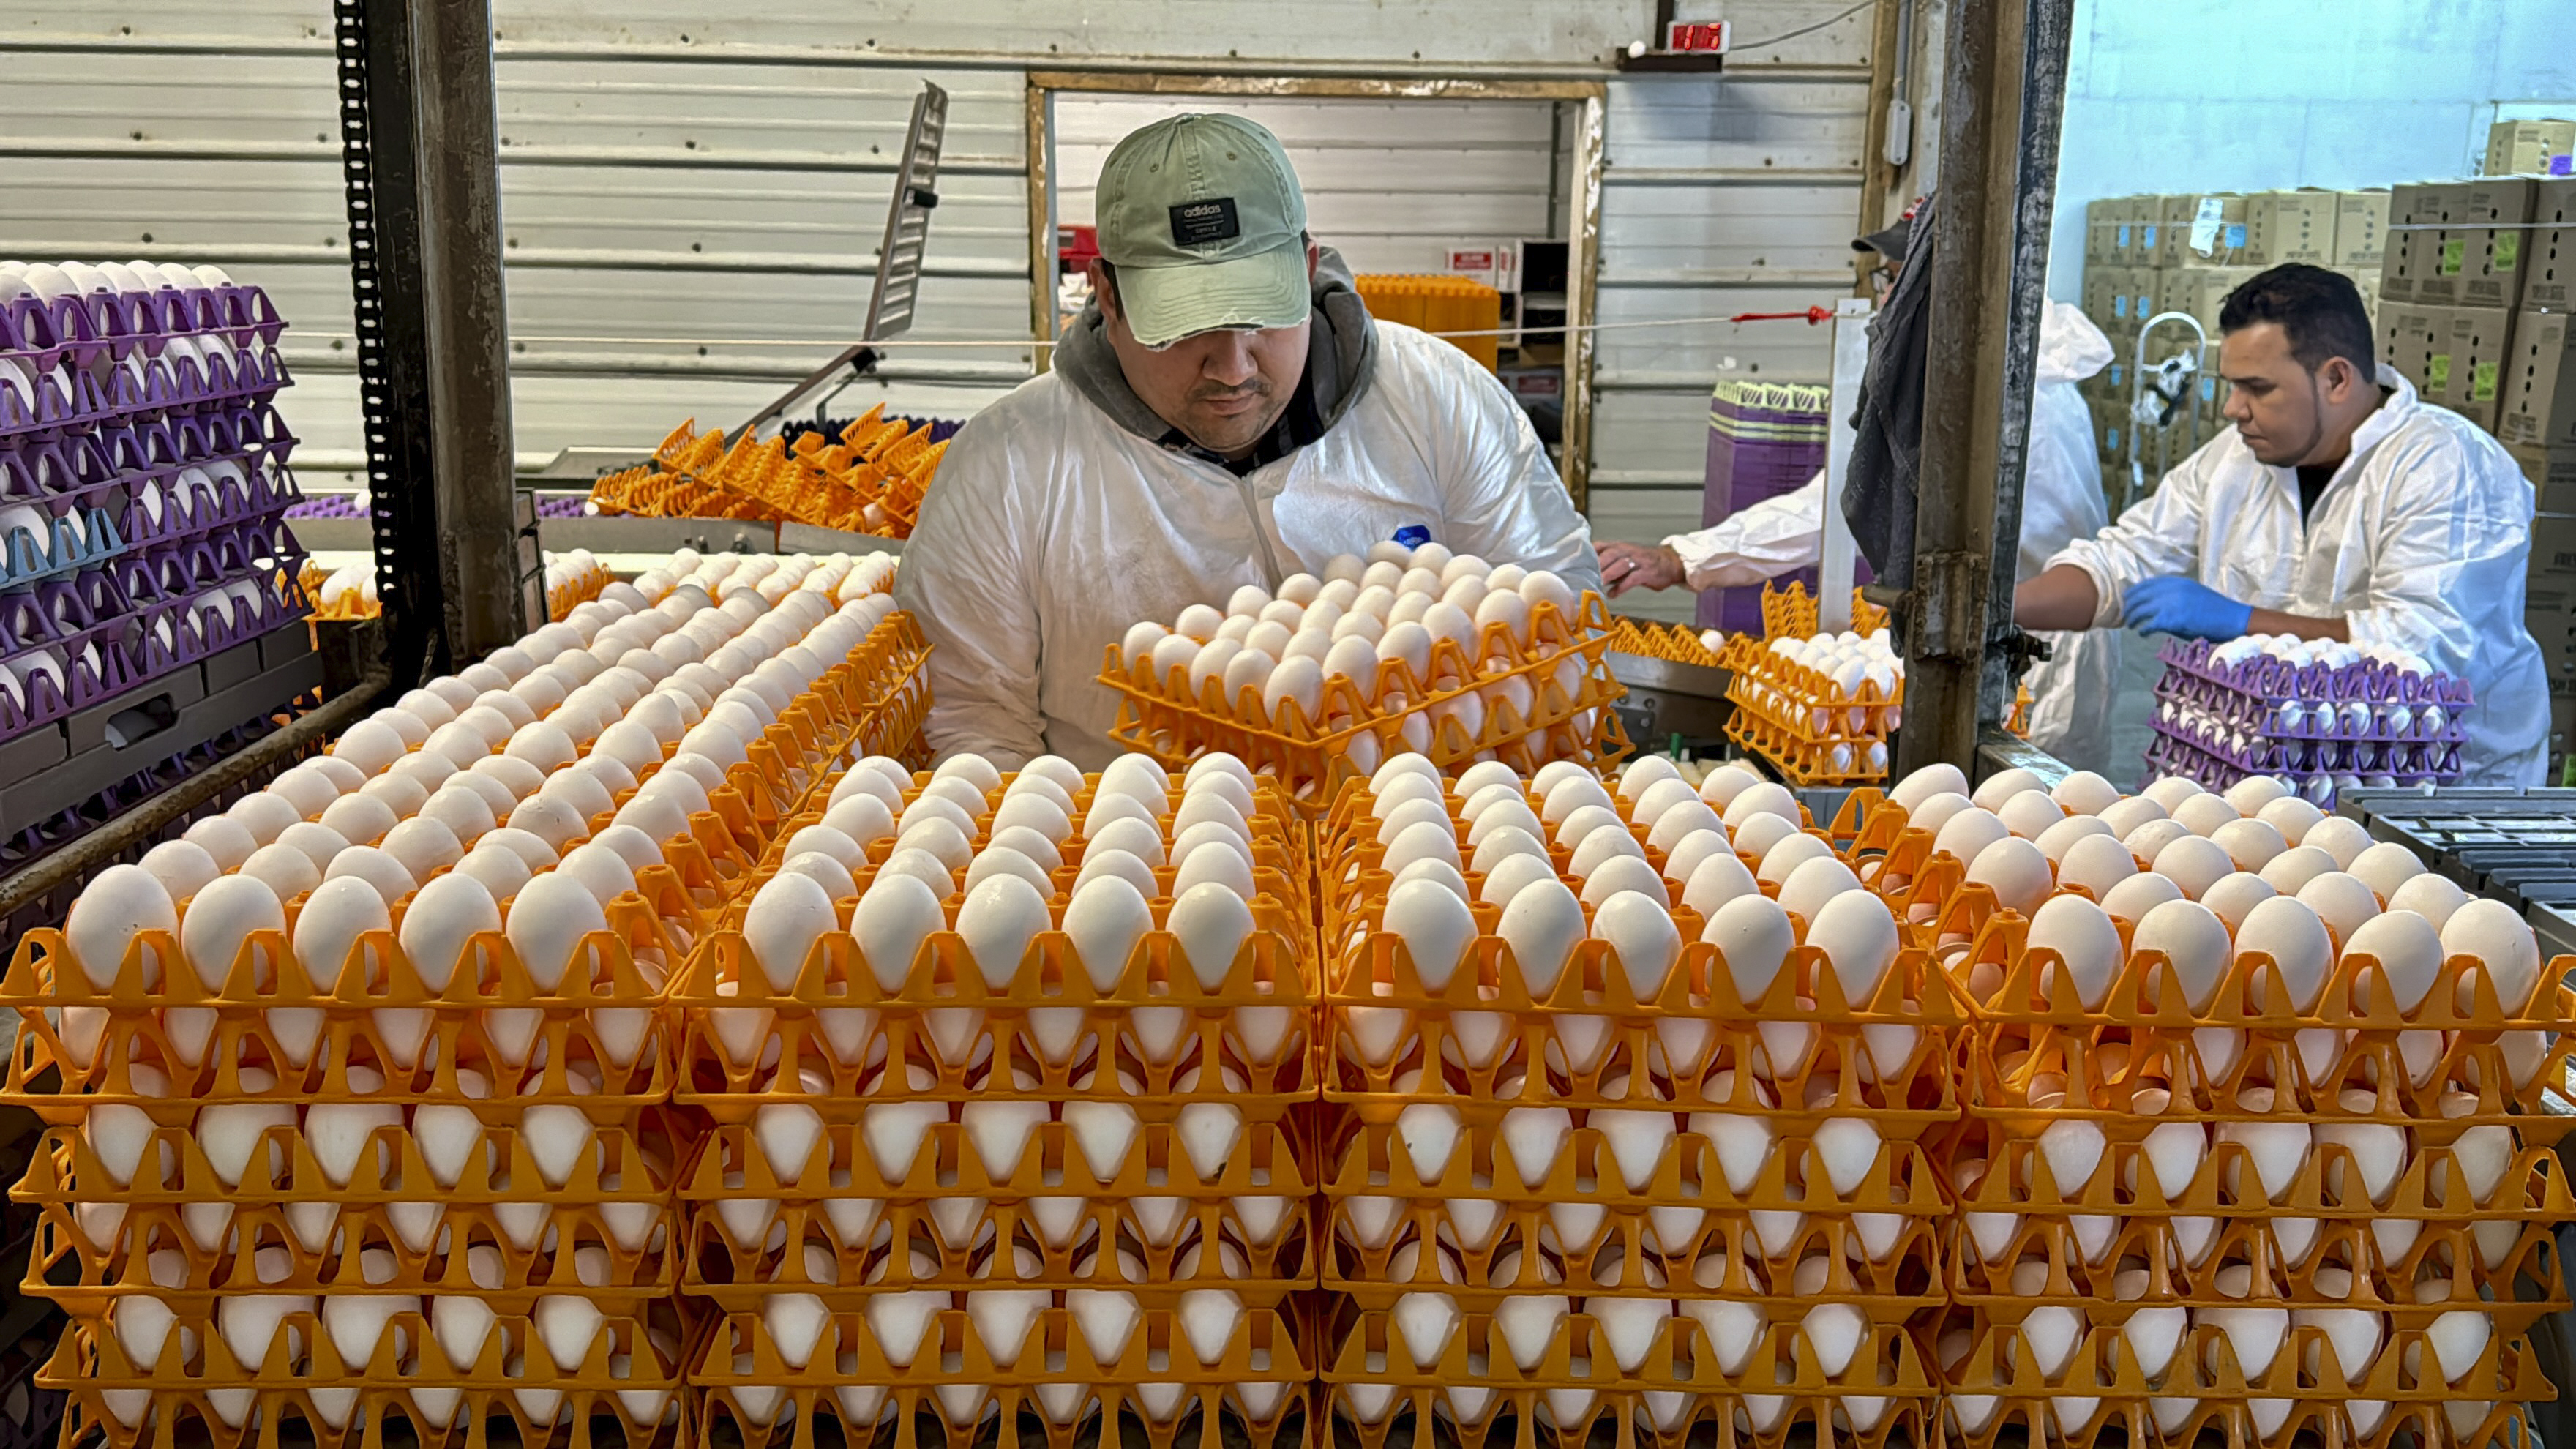 A worker moves crates of eggs